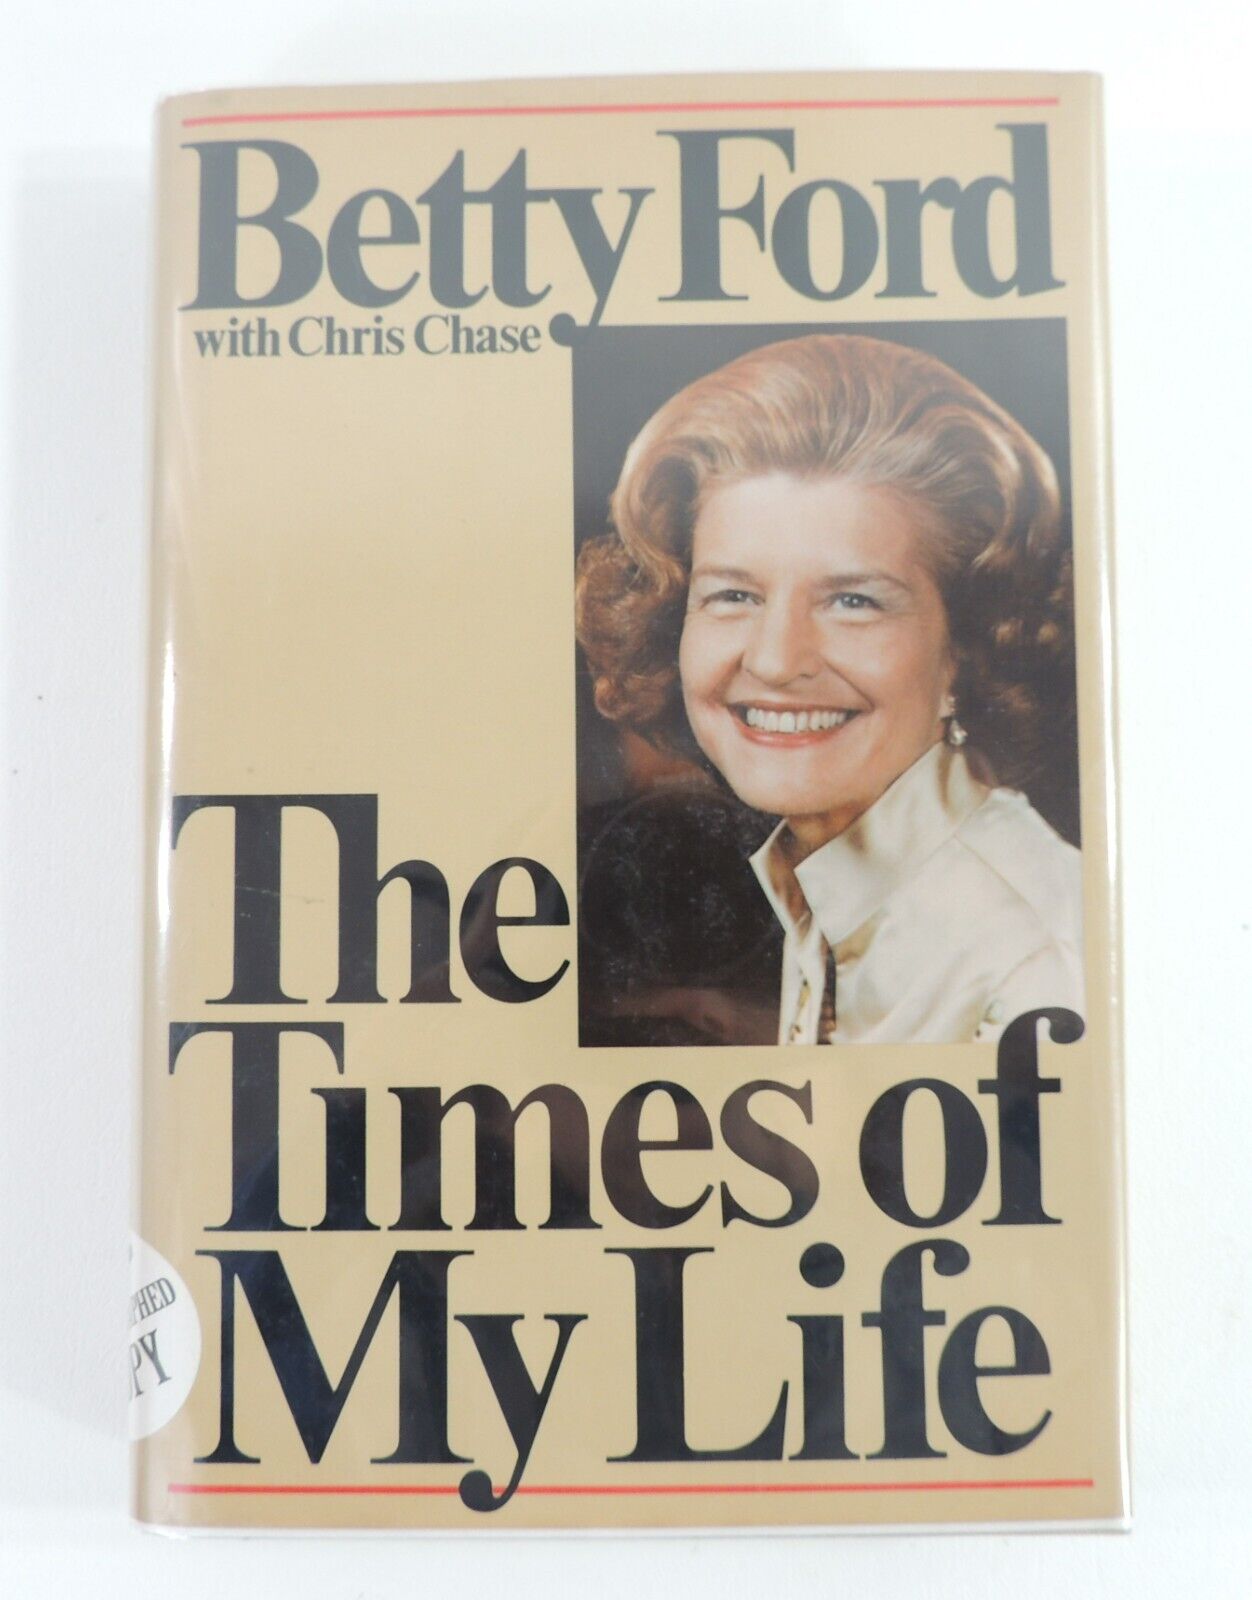 President Ford + The Times of My Life Betty Ford Autographed Book & Program